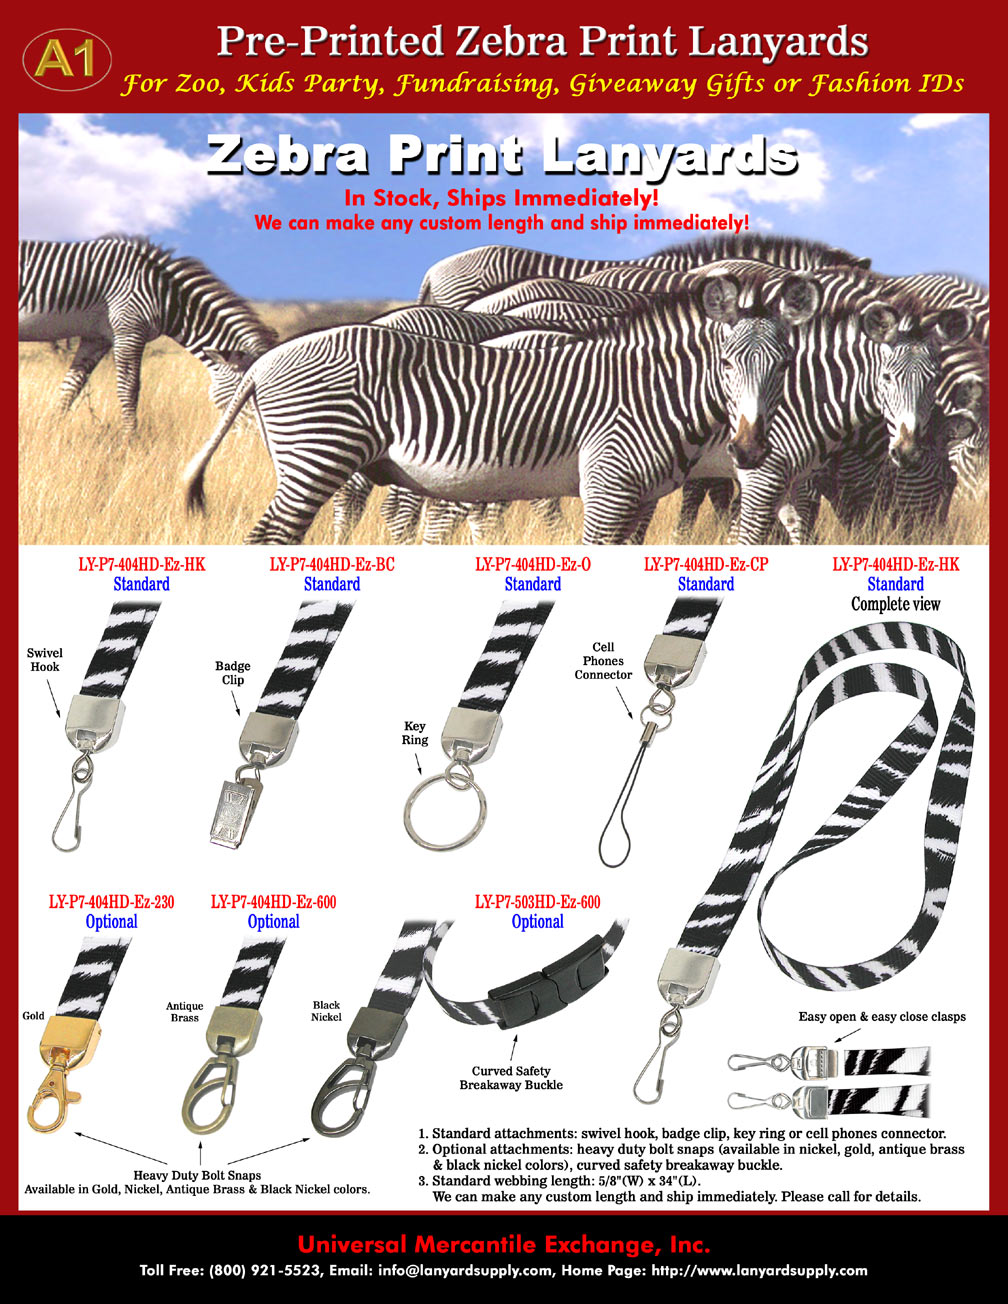 Zebra Lanyards: Cool Zebra Print Lanyards, Zebra Stripes or Patterns Printed Lanyards. Good For Zoo, Kids Party, Fundraising, Promotional Giveaway, Gifts or For Small Business Fashion Name Badges.